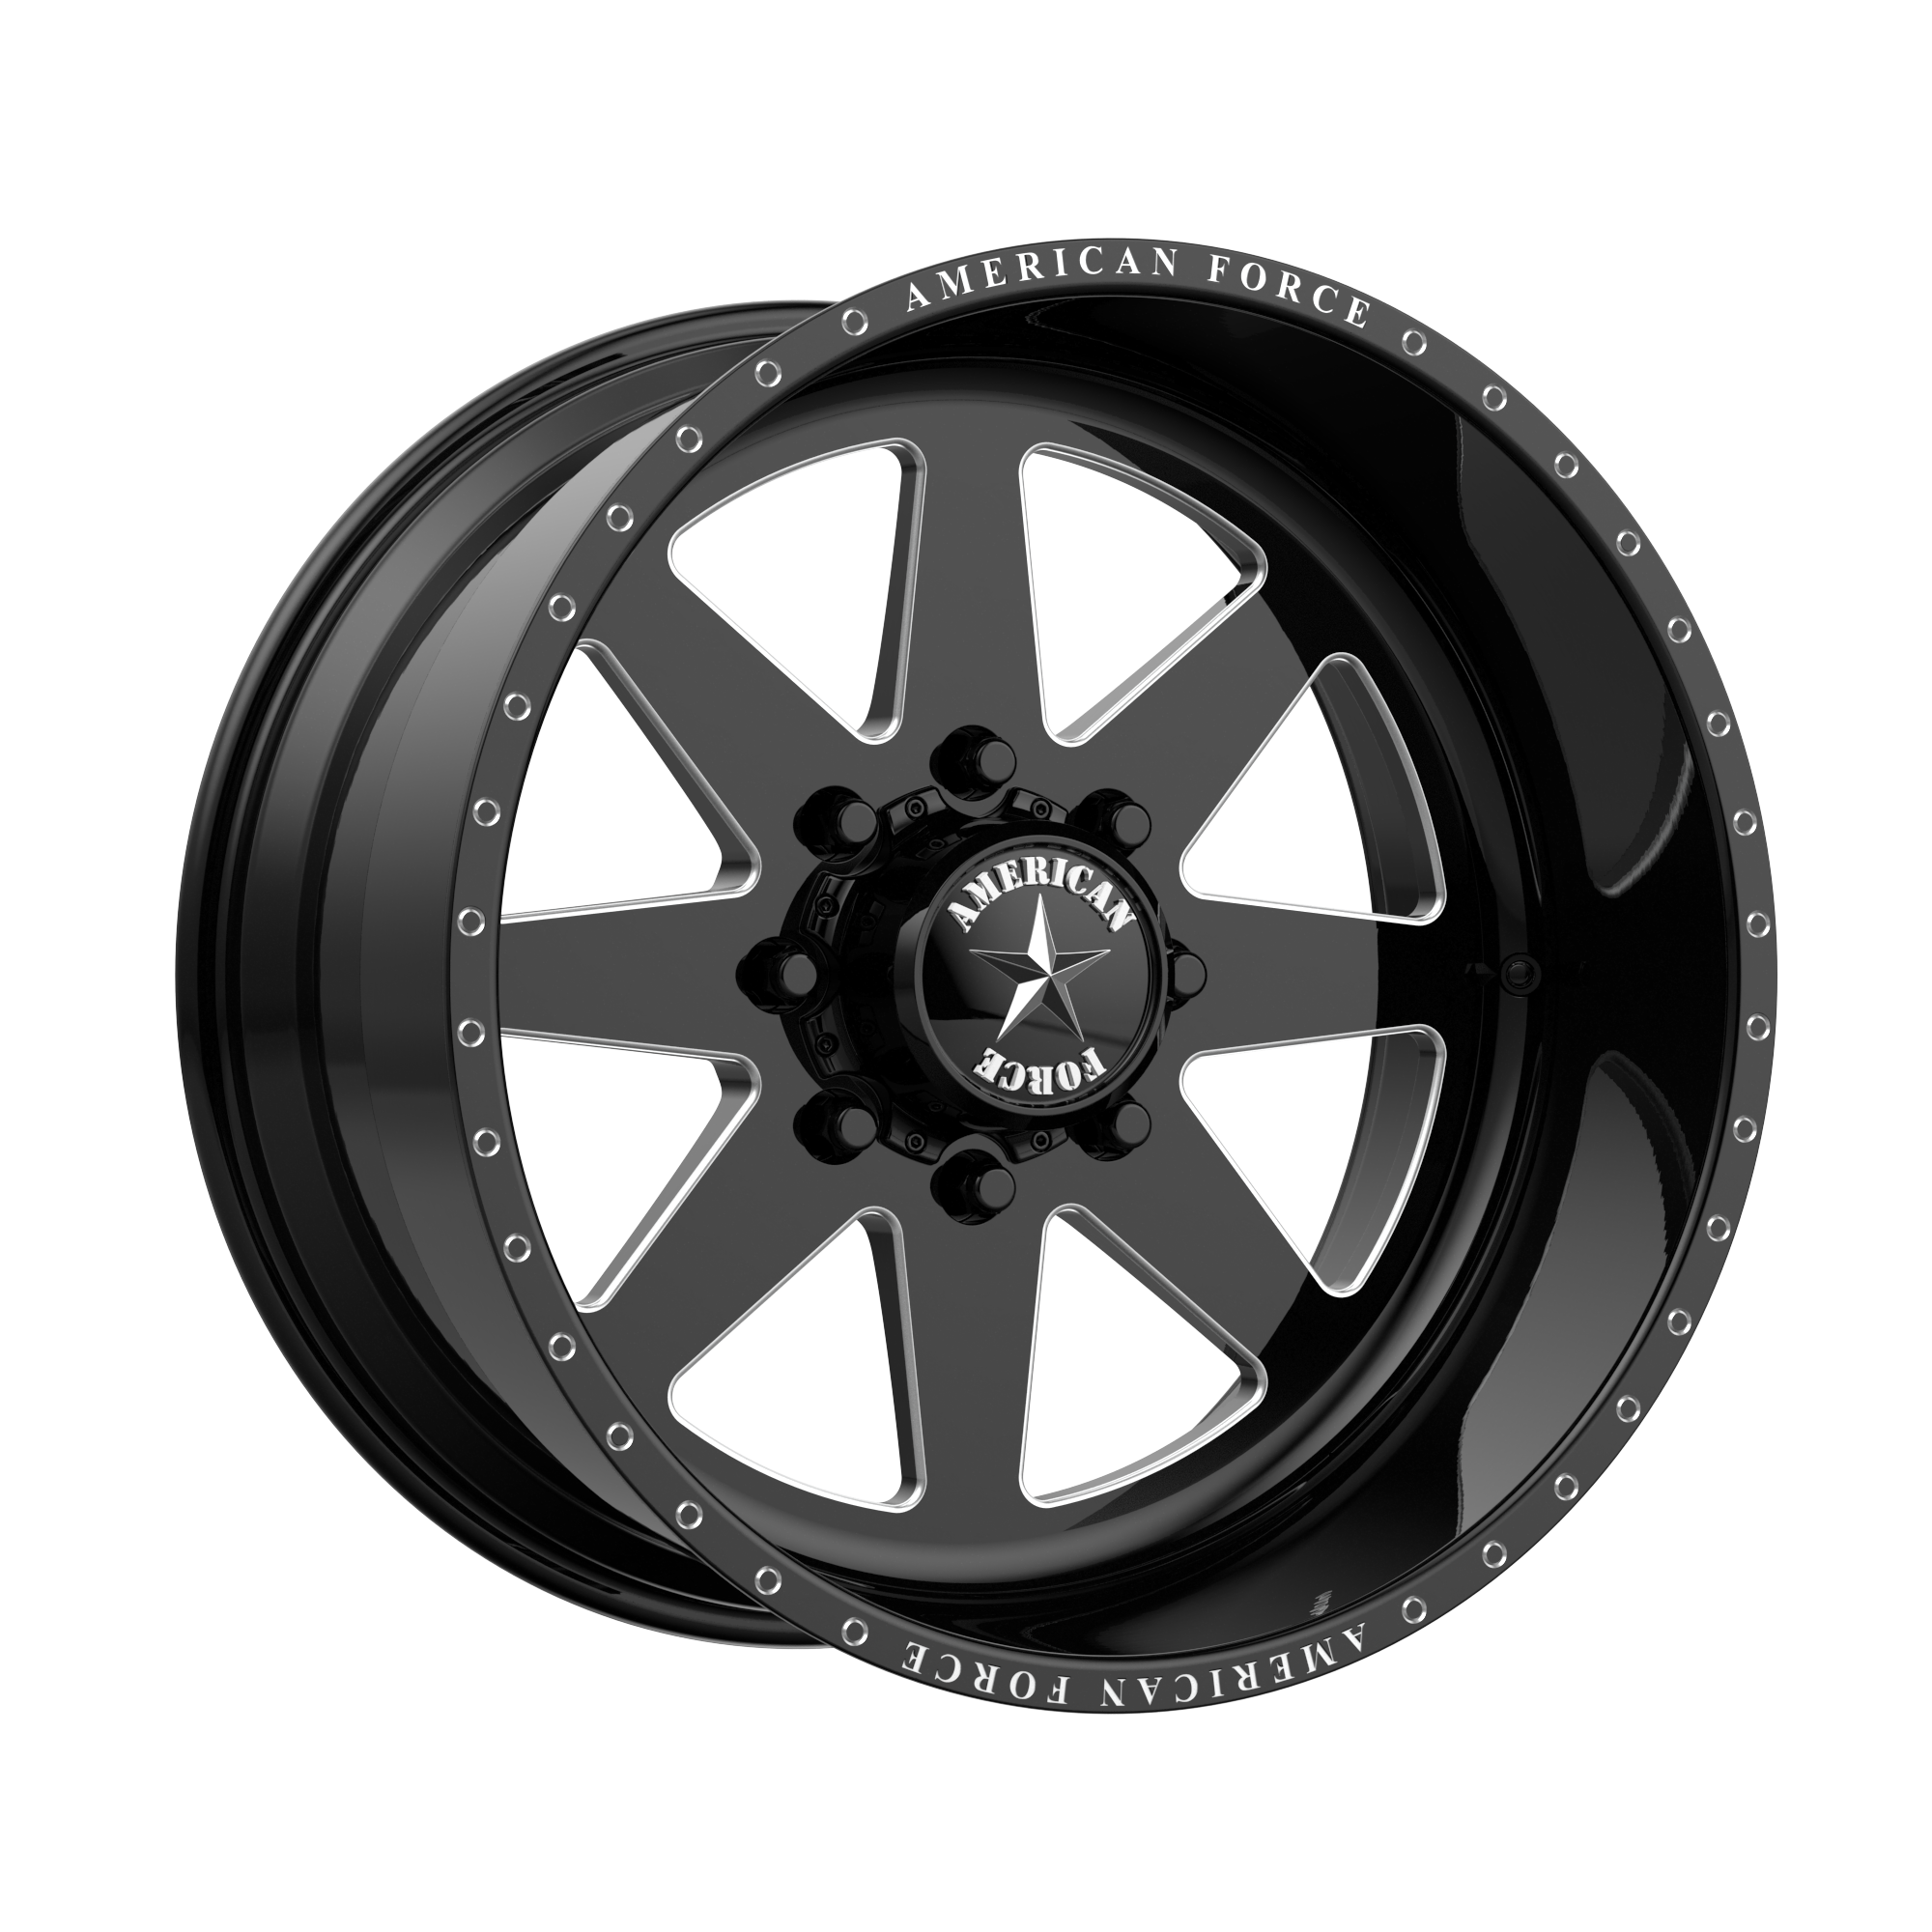 INDEPENDENCE SS 24x14 6x135.00 GLOSS BLACK MACHINED (-73 mm) - Tires and Engine Performance